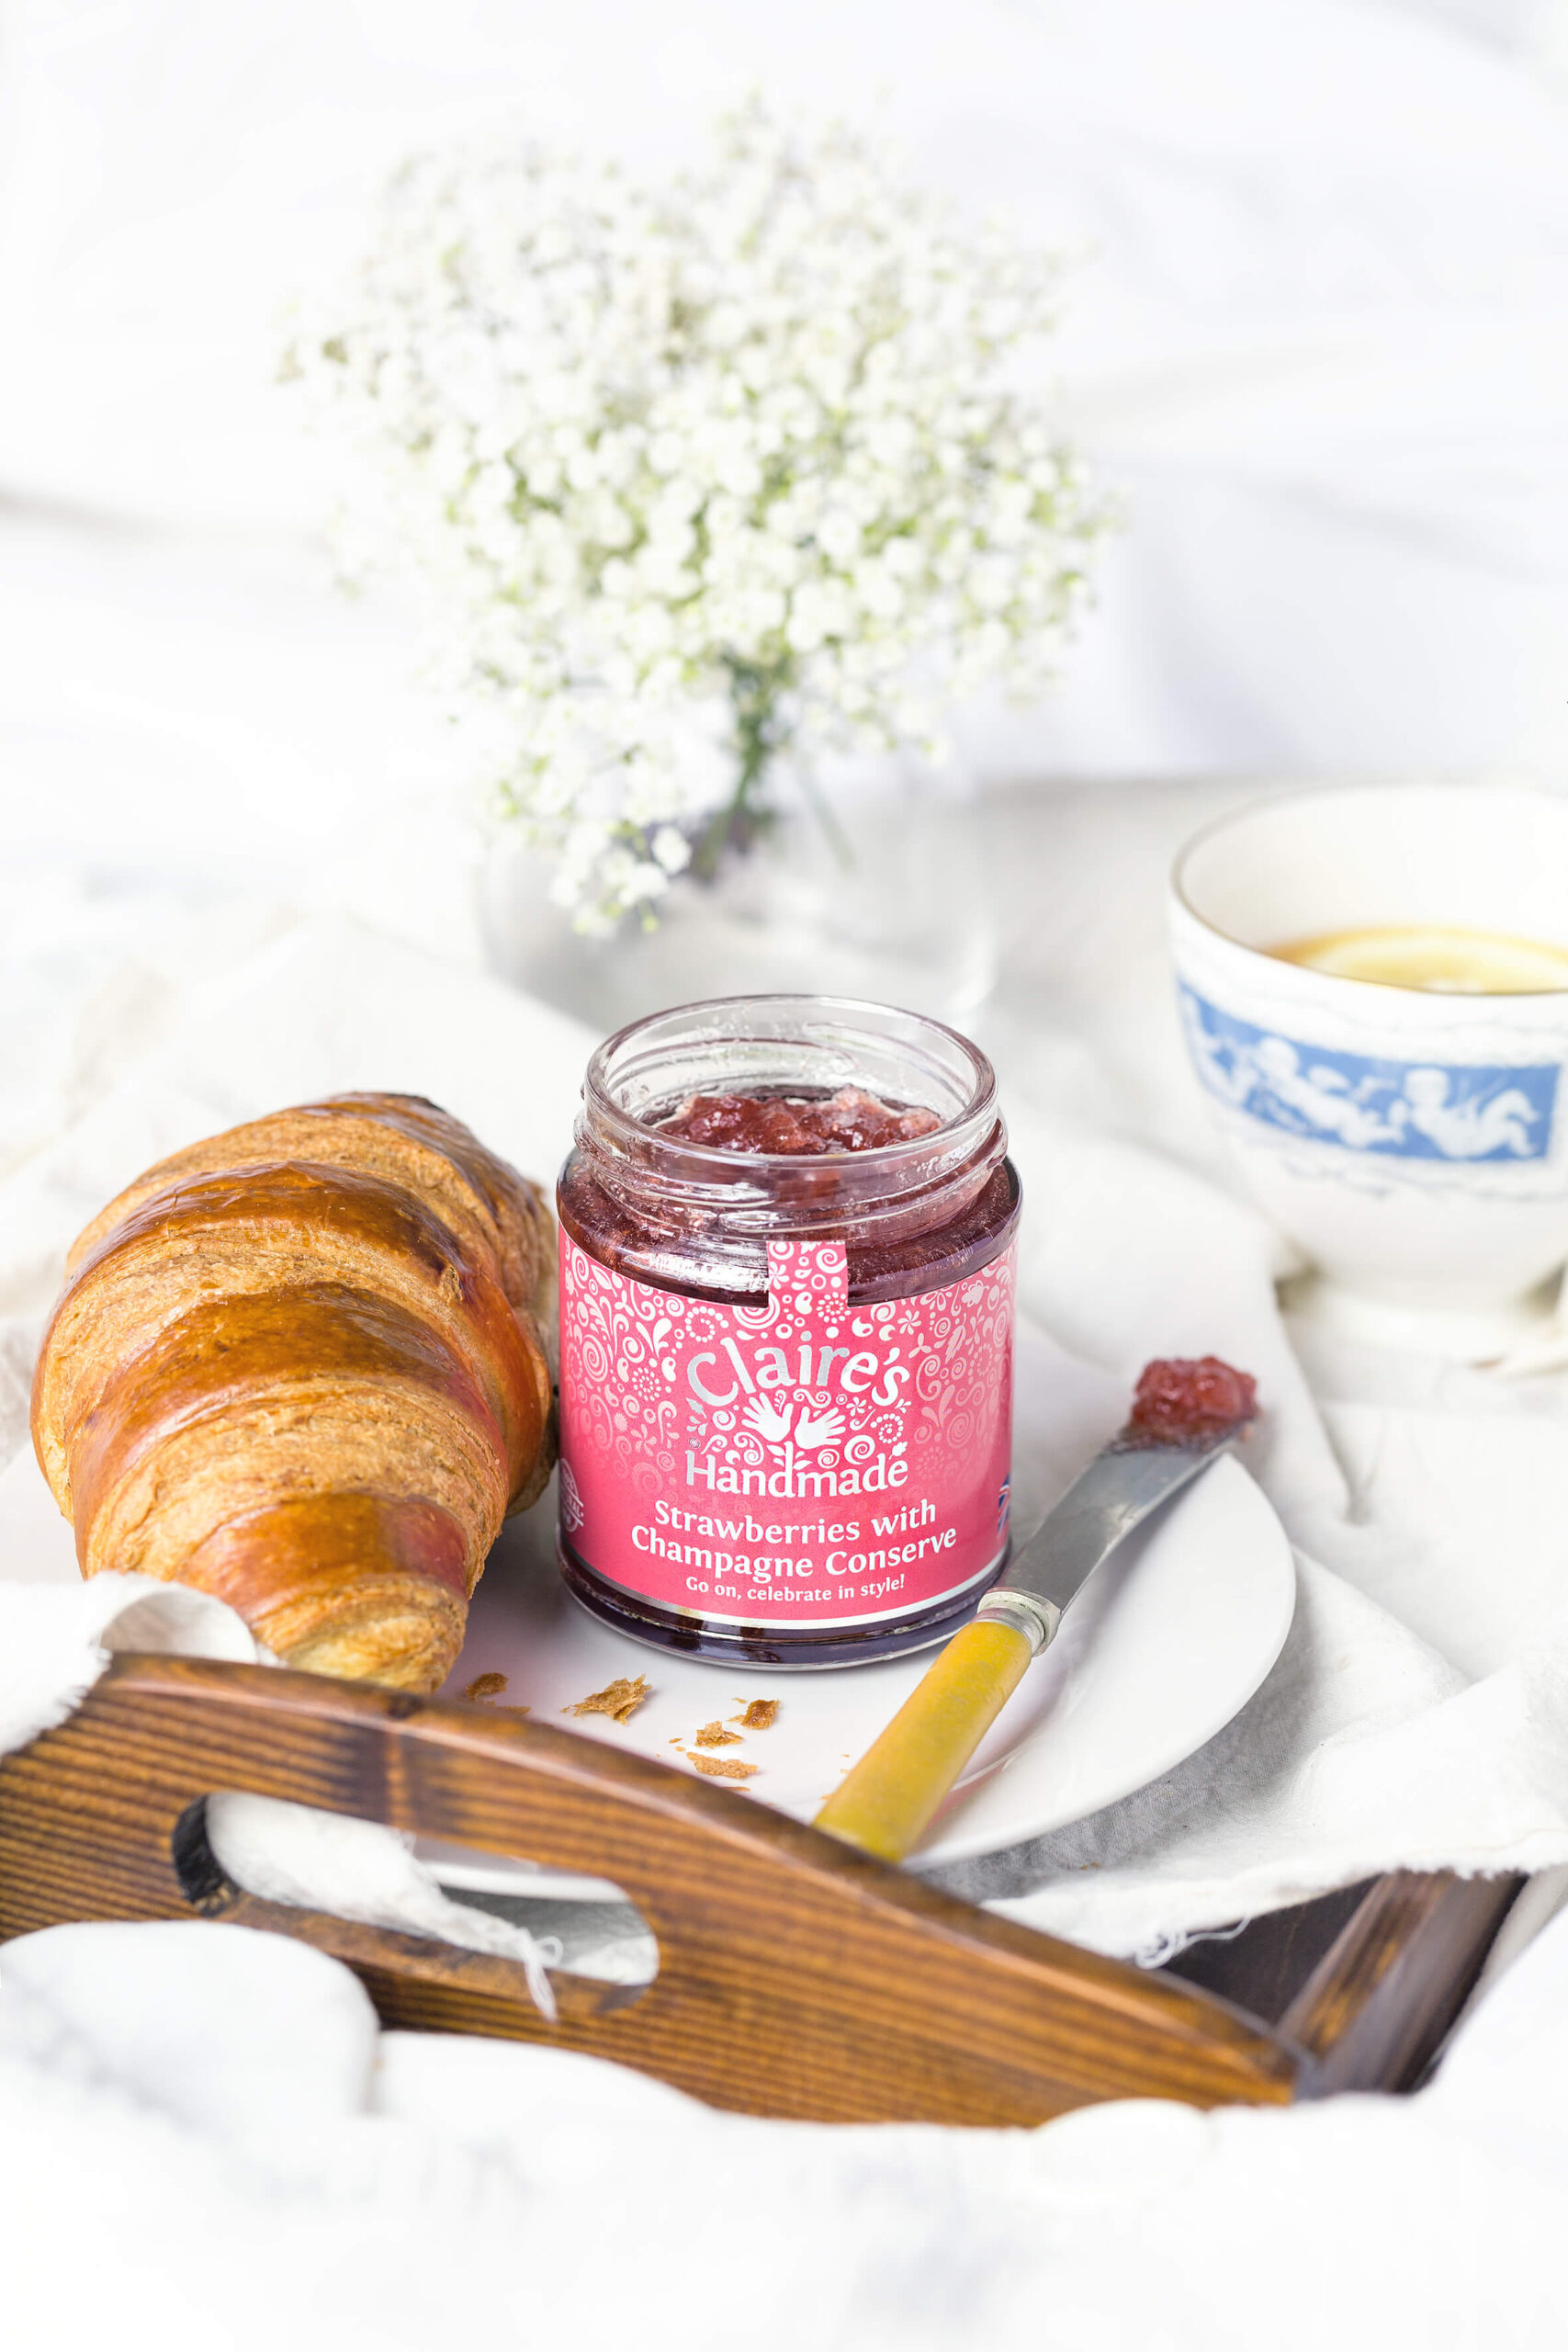 Claire Handmade Strawberries & Champagne Conserve with a freshly baked croissant